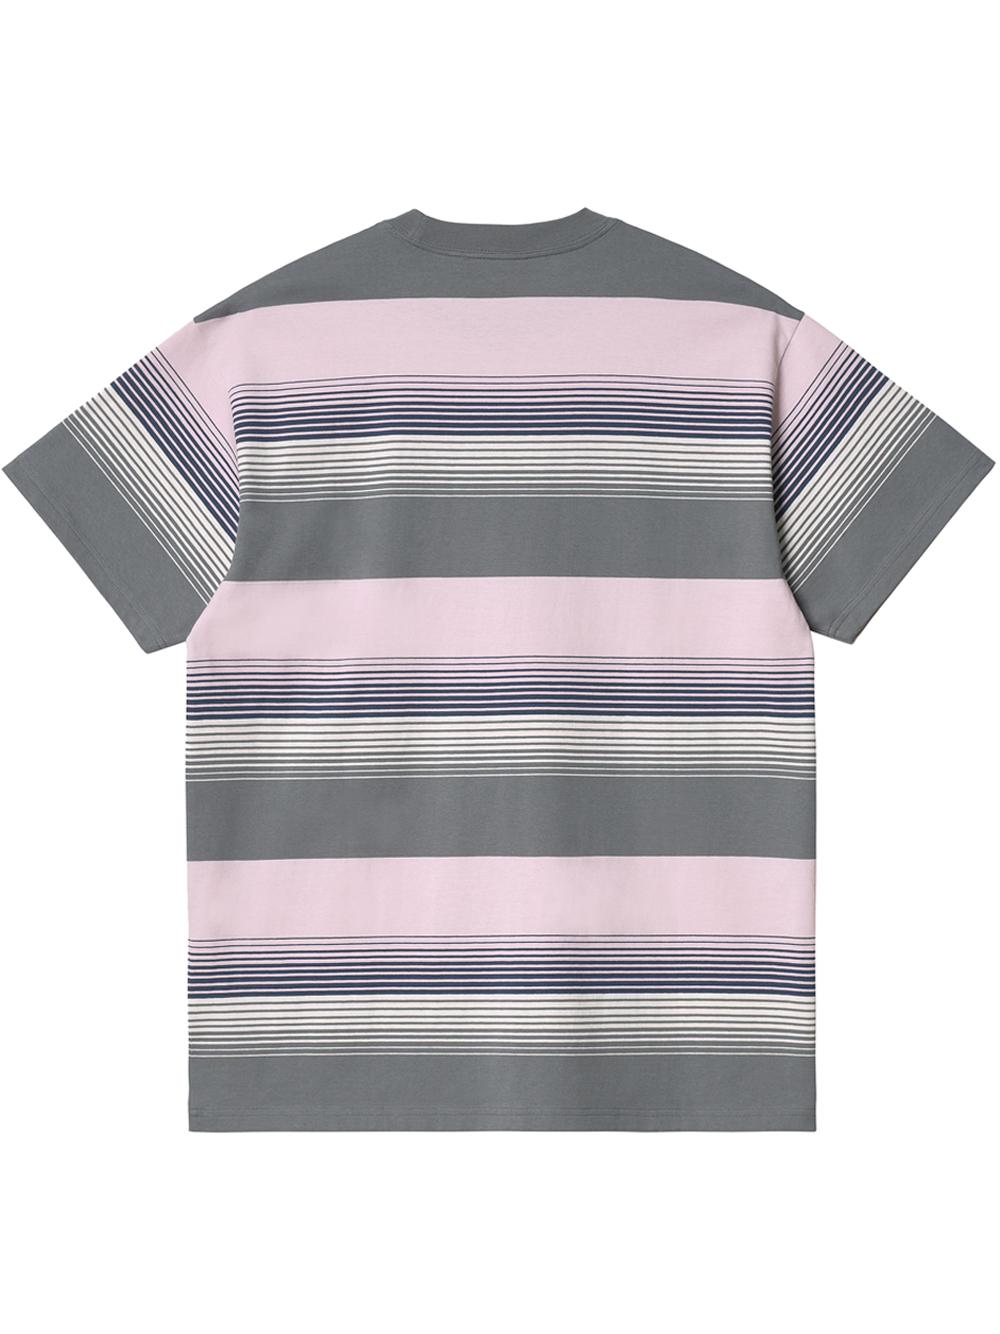 Carhartt WIP Hanmore T-shirt Multicolor In Cotton for Men | Lyst